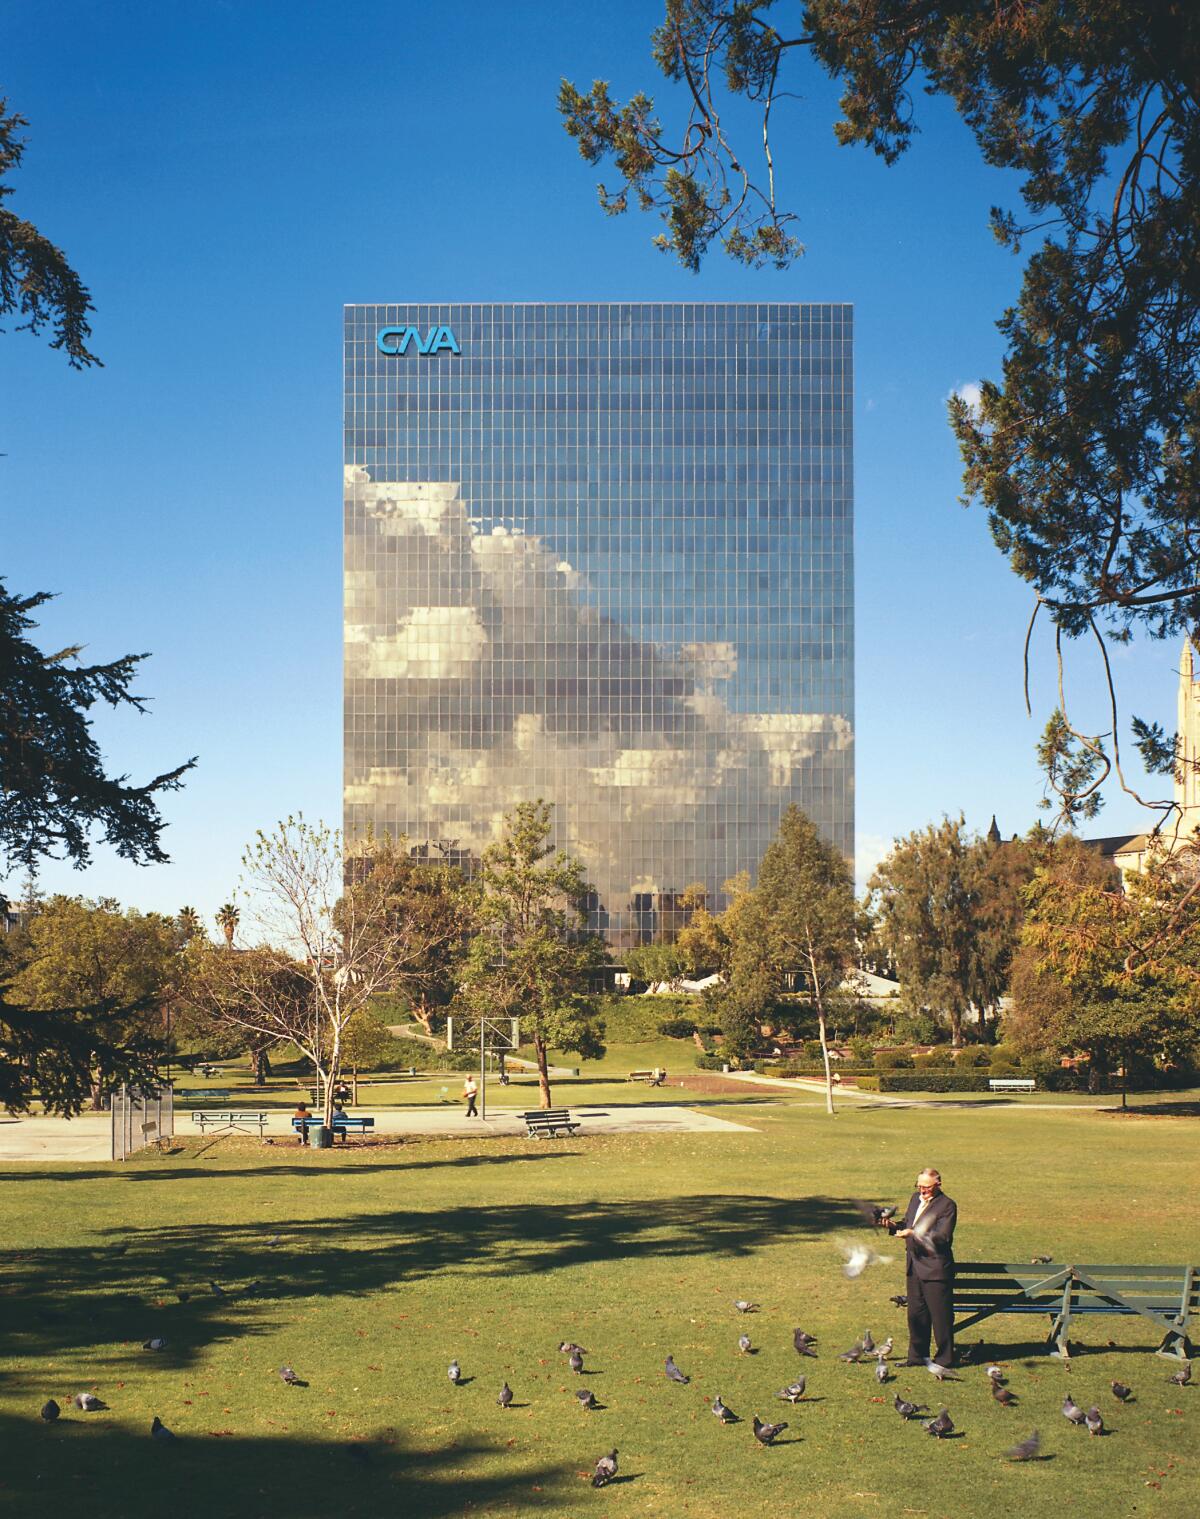 Clouds and sky are reflected on a glassy tower that rises above a park where a man feeds pigeons